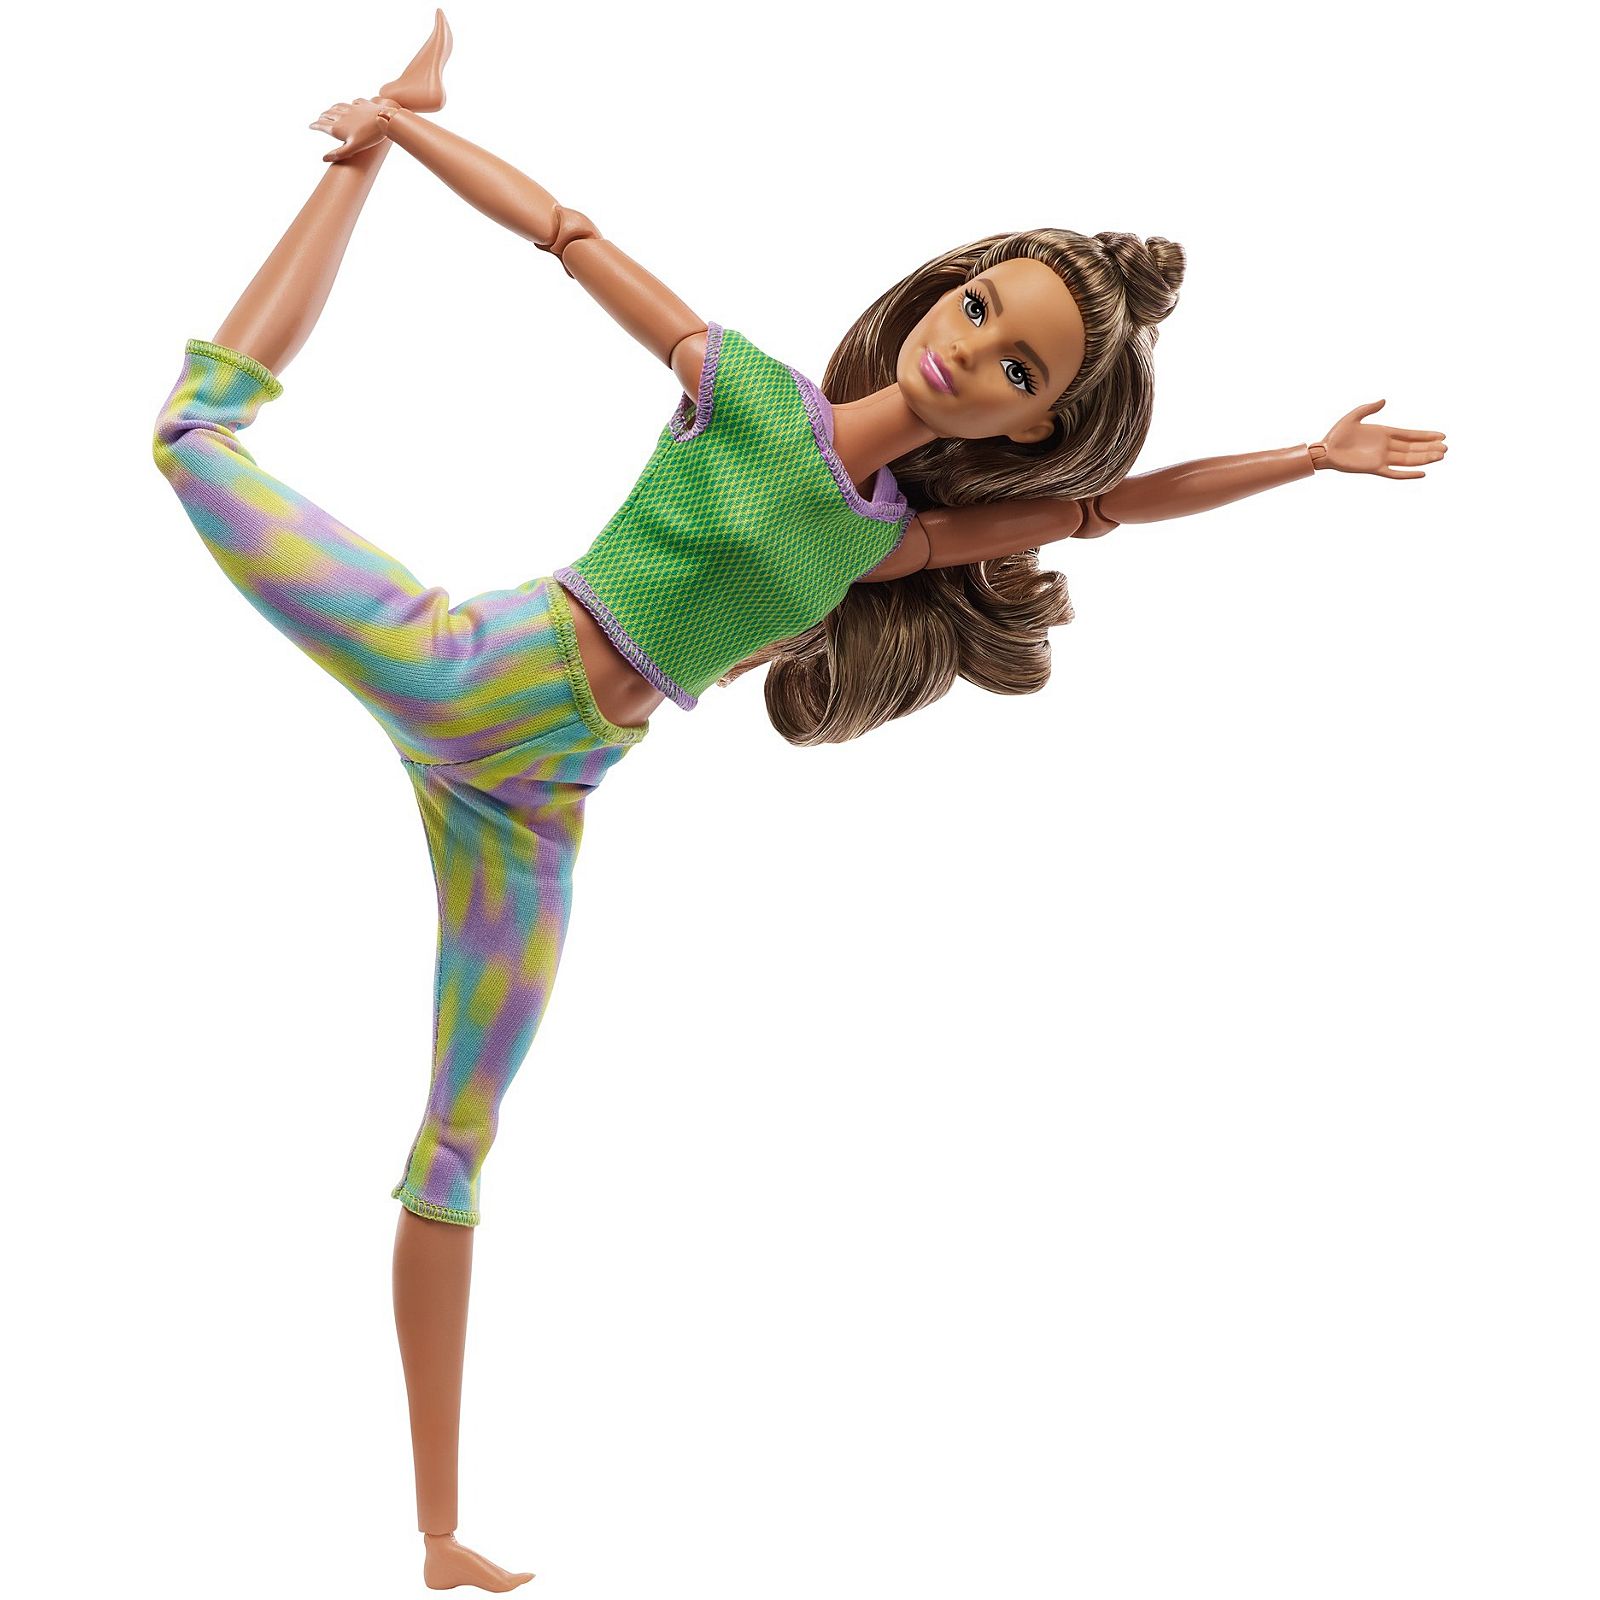 Barbie Made to Move Exercise Yoga Doll with 22 Flexible Joints